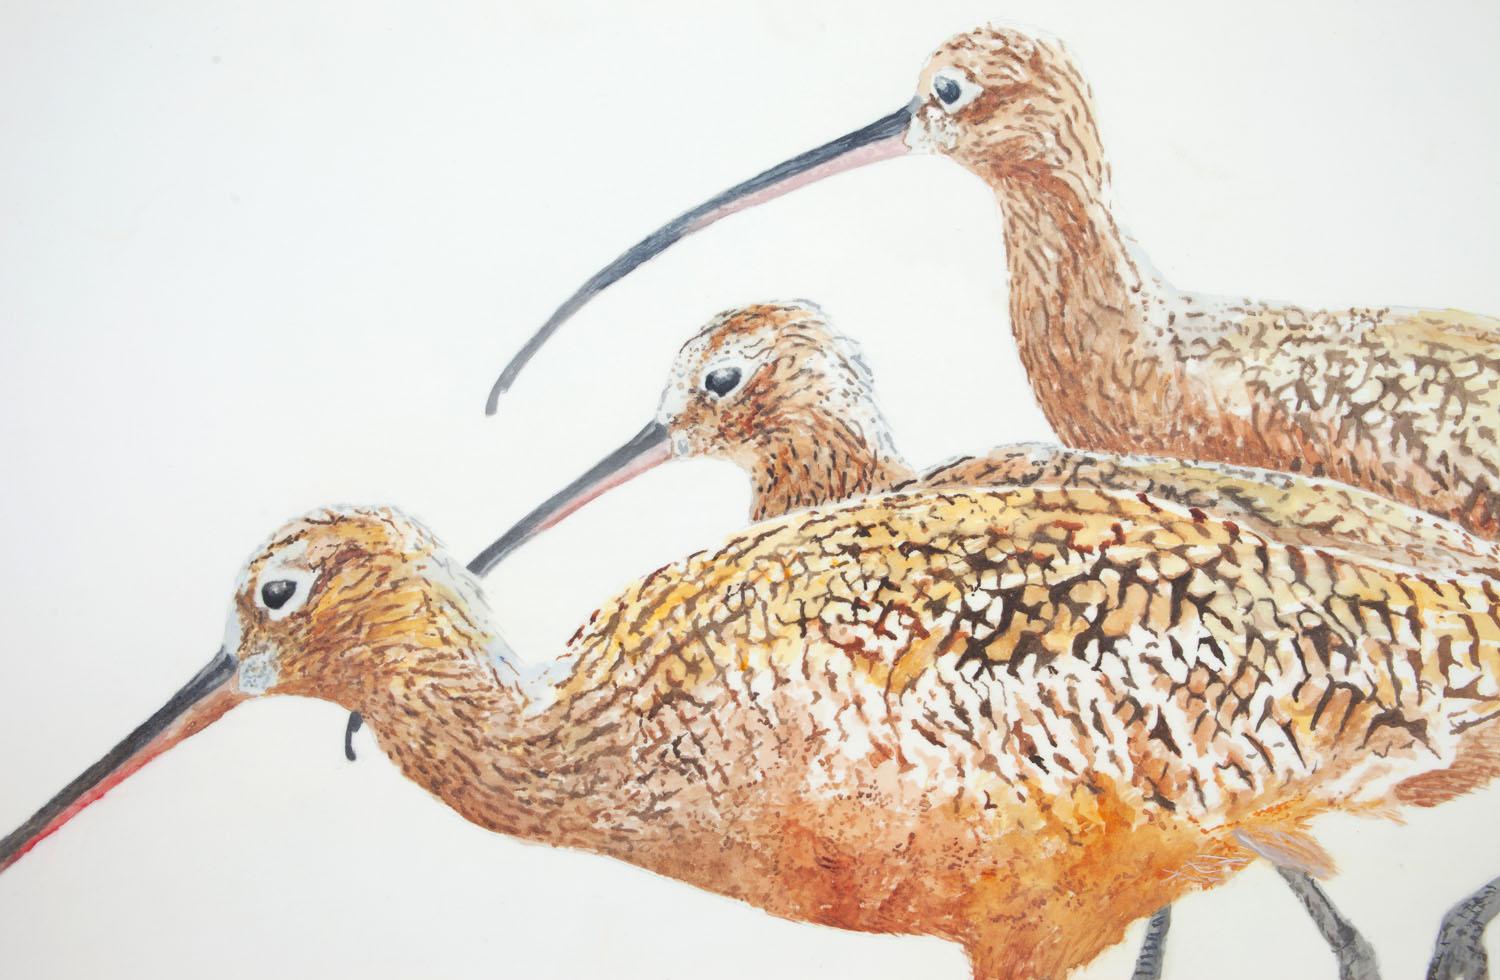 Three Long-Billed Curlews, Original Painting - White Animal Painting by Emil Morhardt